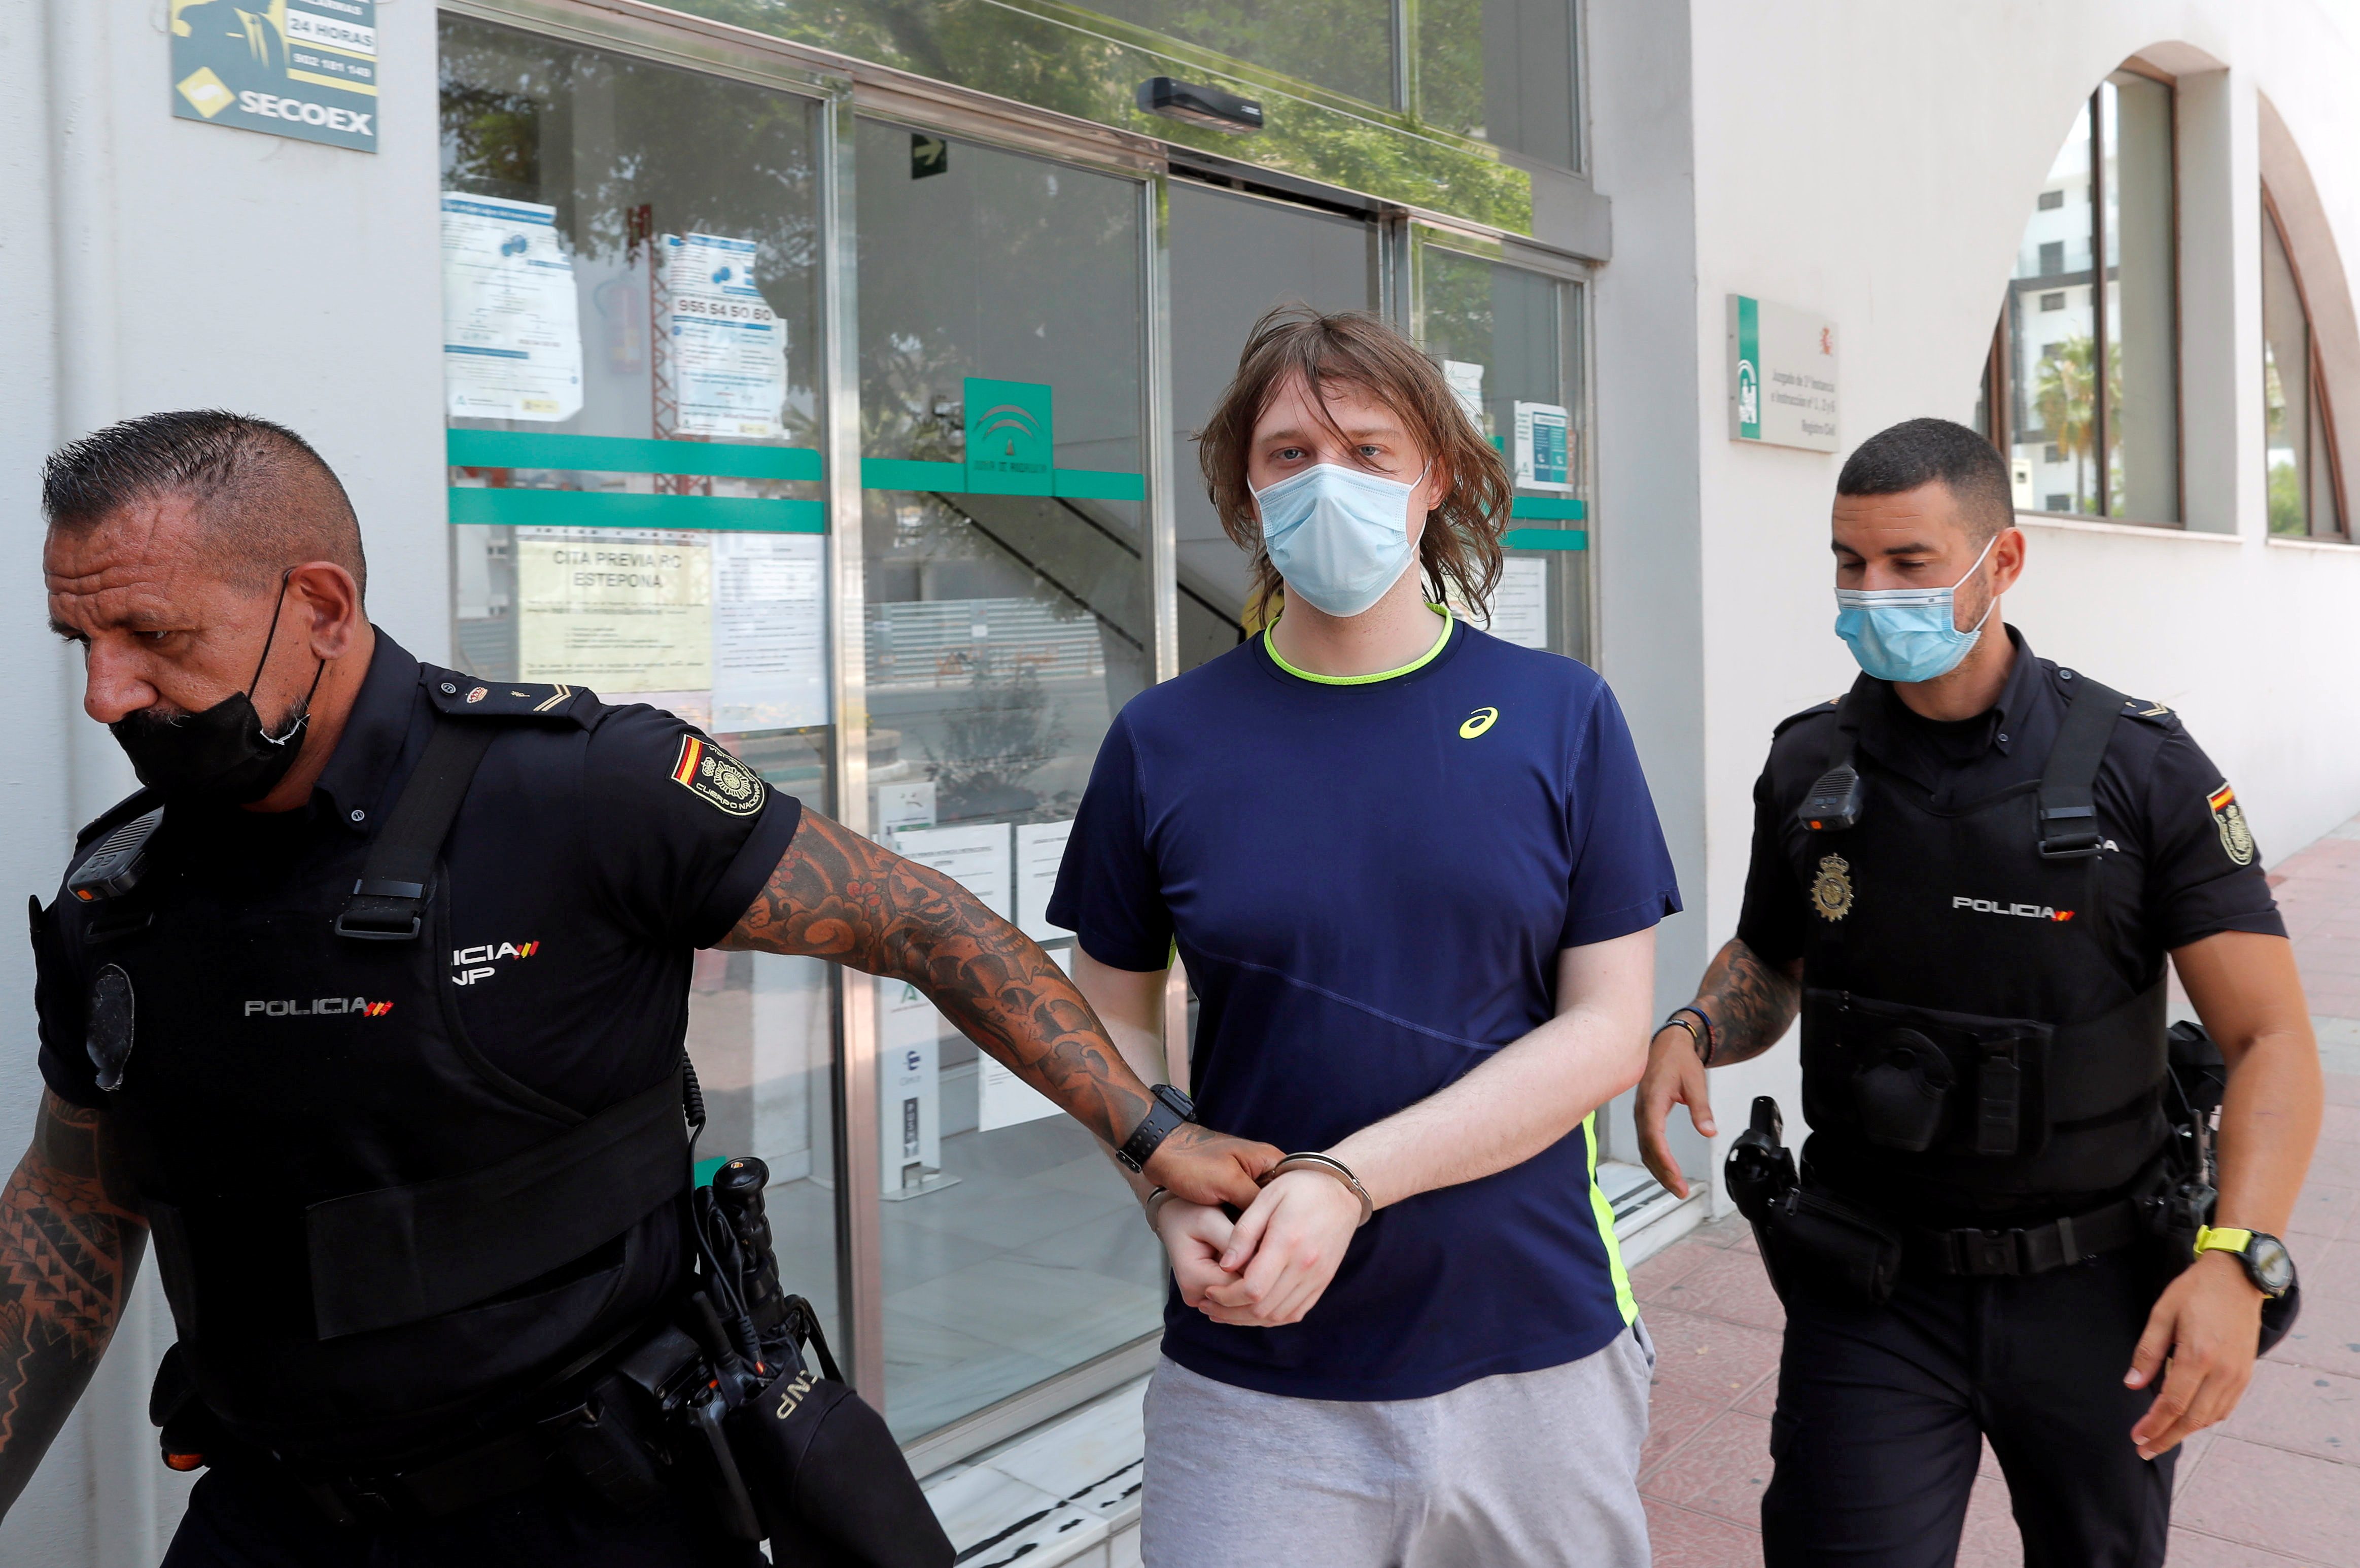 Briton accused of Twitter hack jailed in Spain pending US extradition hearing